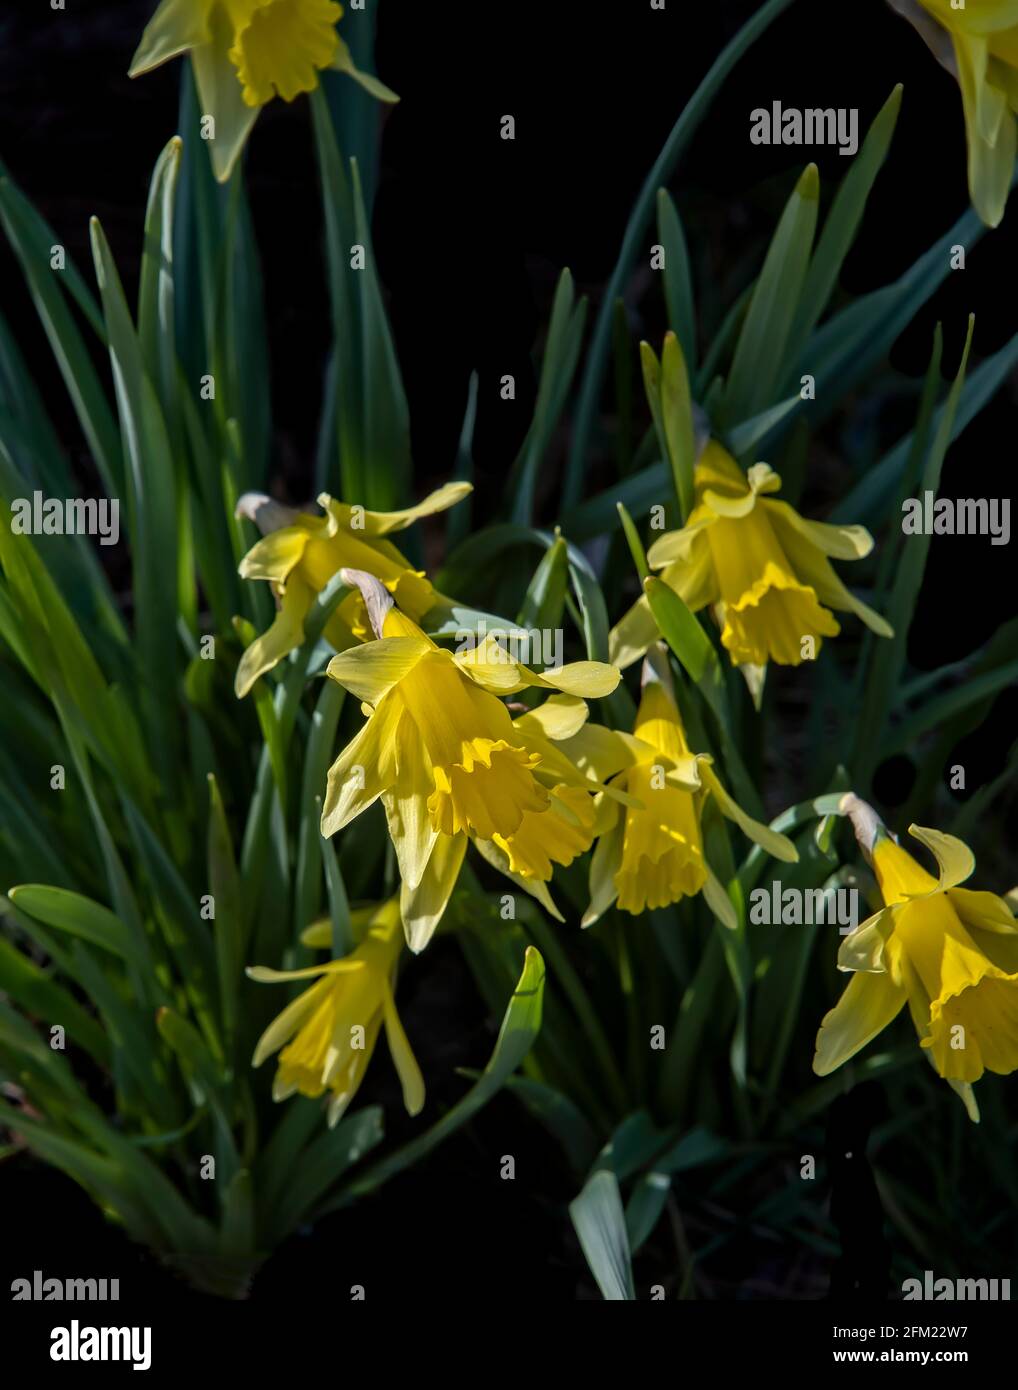 Cluster of yellow daffodil flowers on a dark background Stock Photo